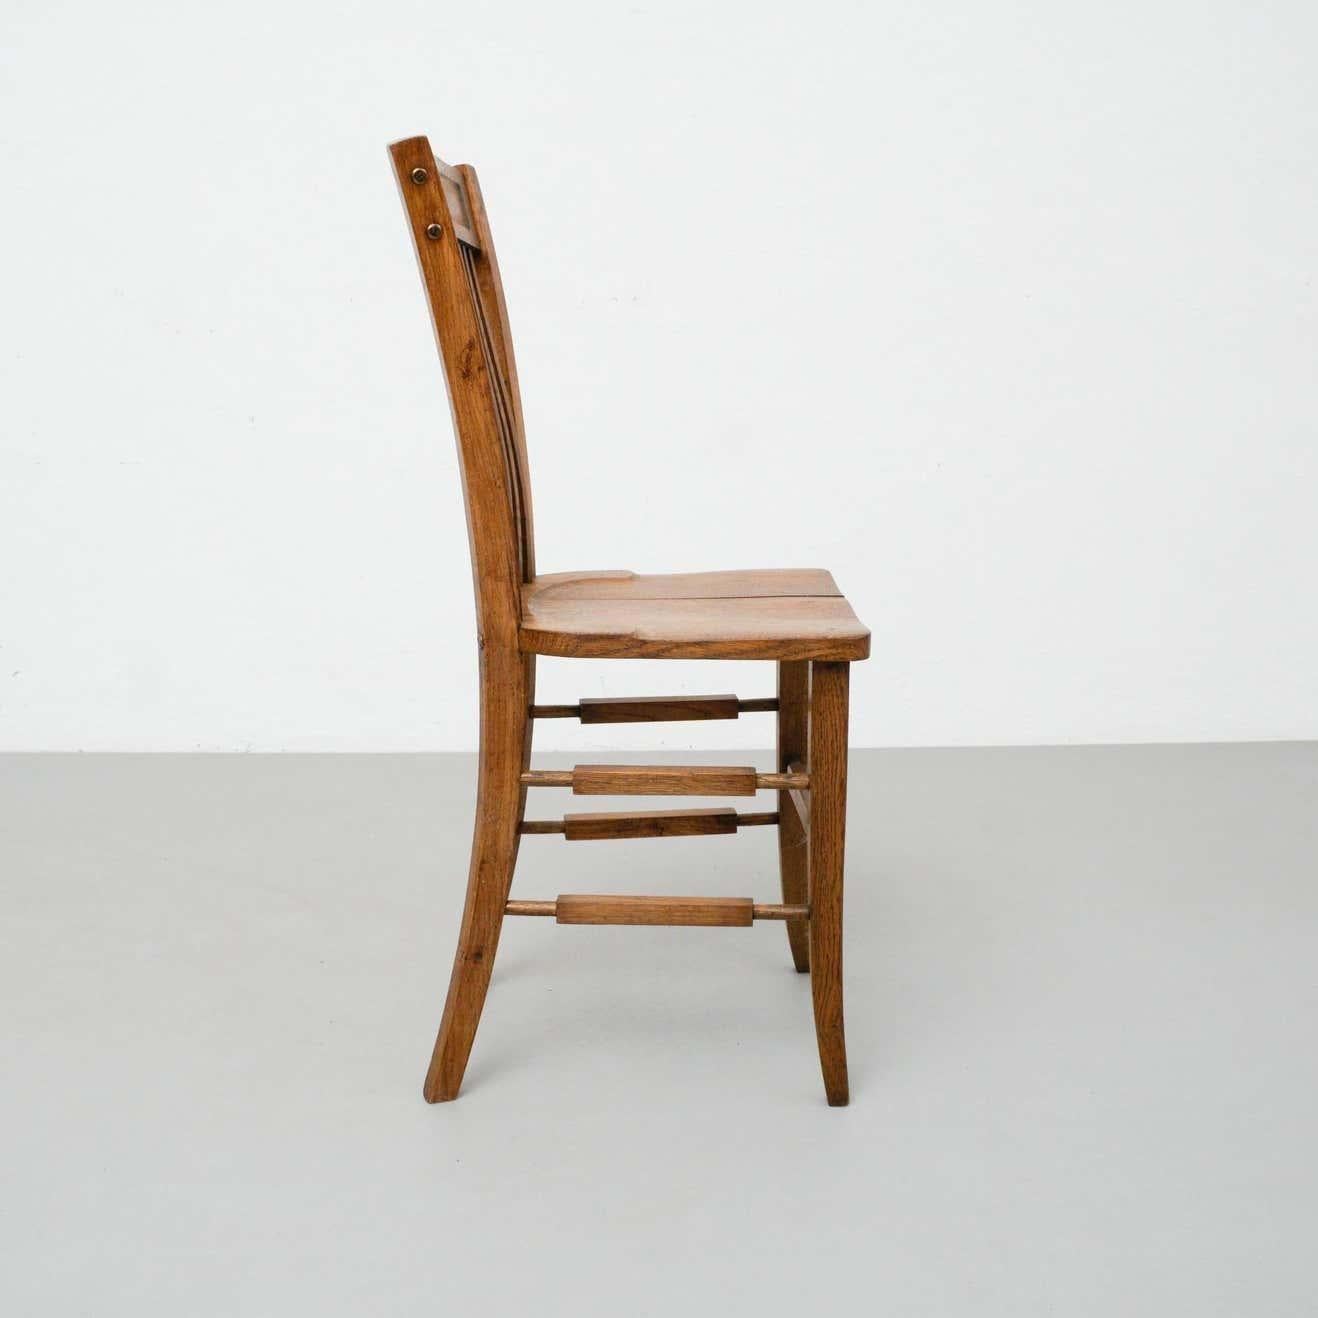 Early 20th century traditional wood chair.
By Unknown Manufacturer. 
France

In original condition with minor wear consistent of age and use, preserving a beautiful patina.
Wood Slats of the seat are a bit separated but doesnt compromises the